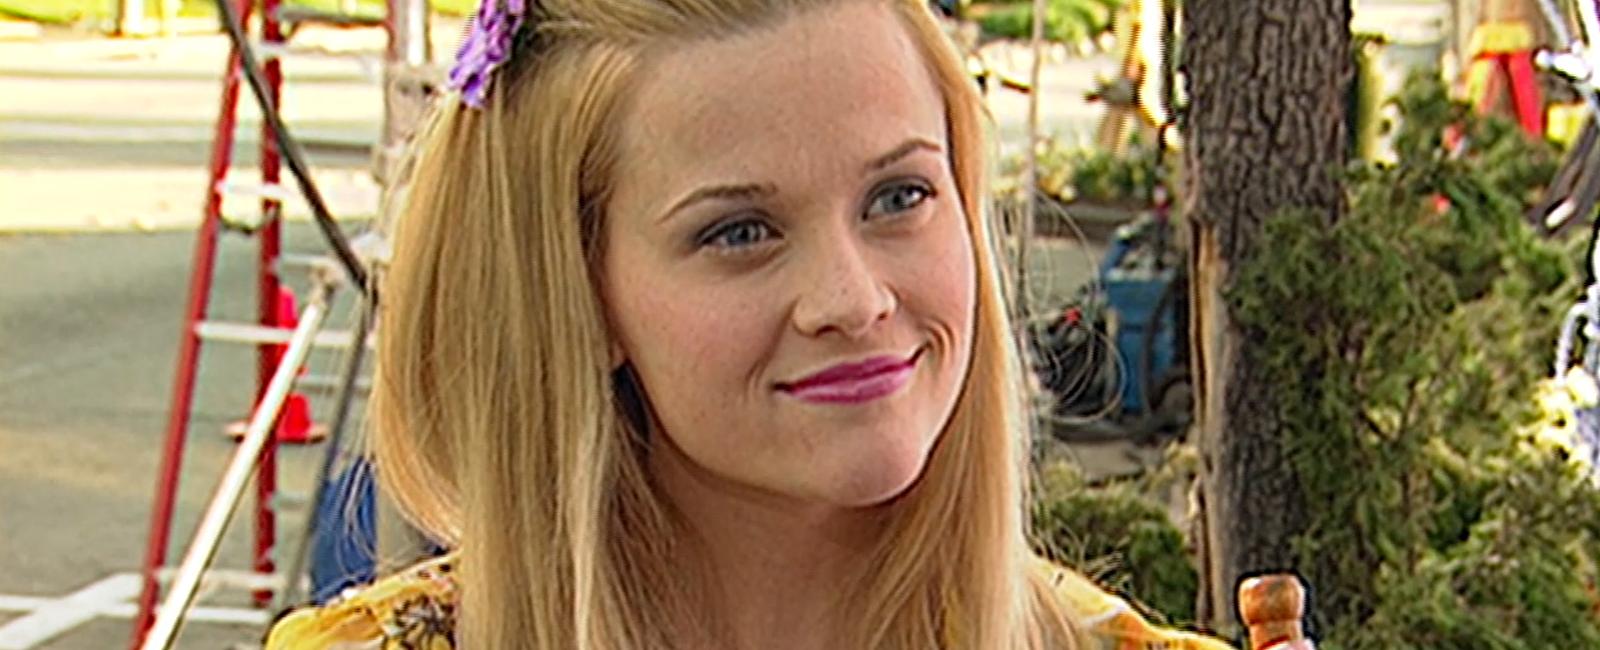 Reece witherspoon gave birth to her first child a few months before filming legally blonde so she was often filmed after not sleeping the night before having been up with her baby